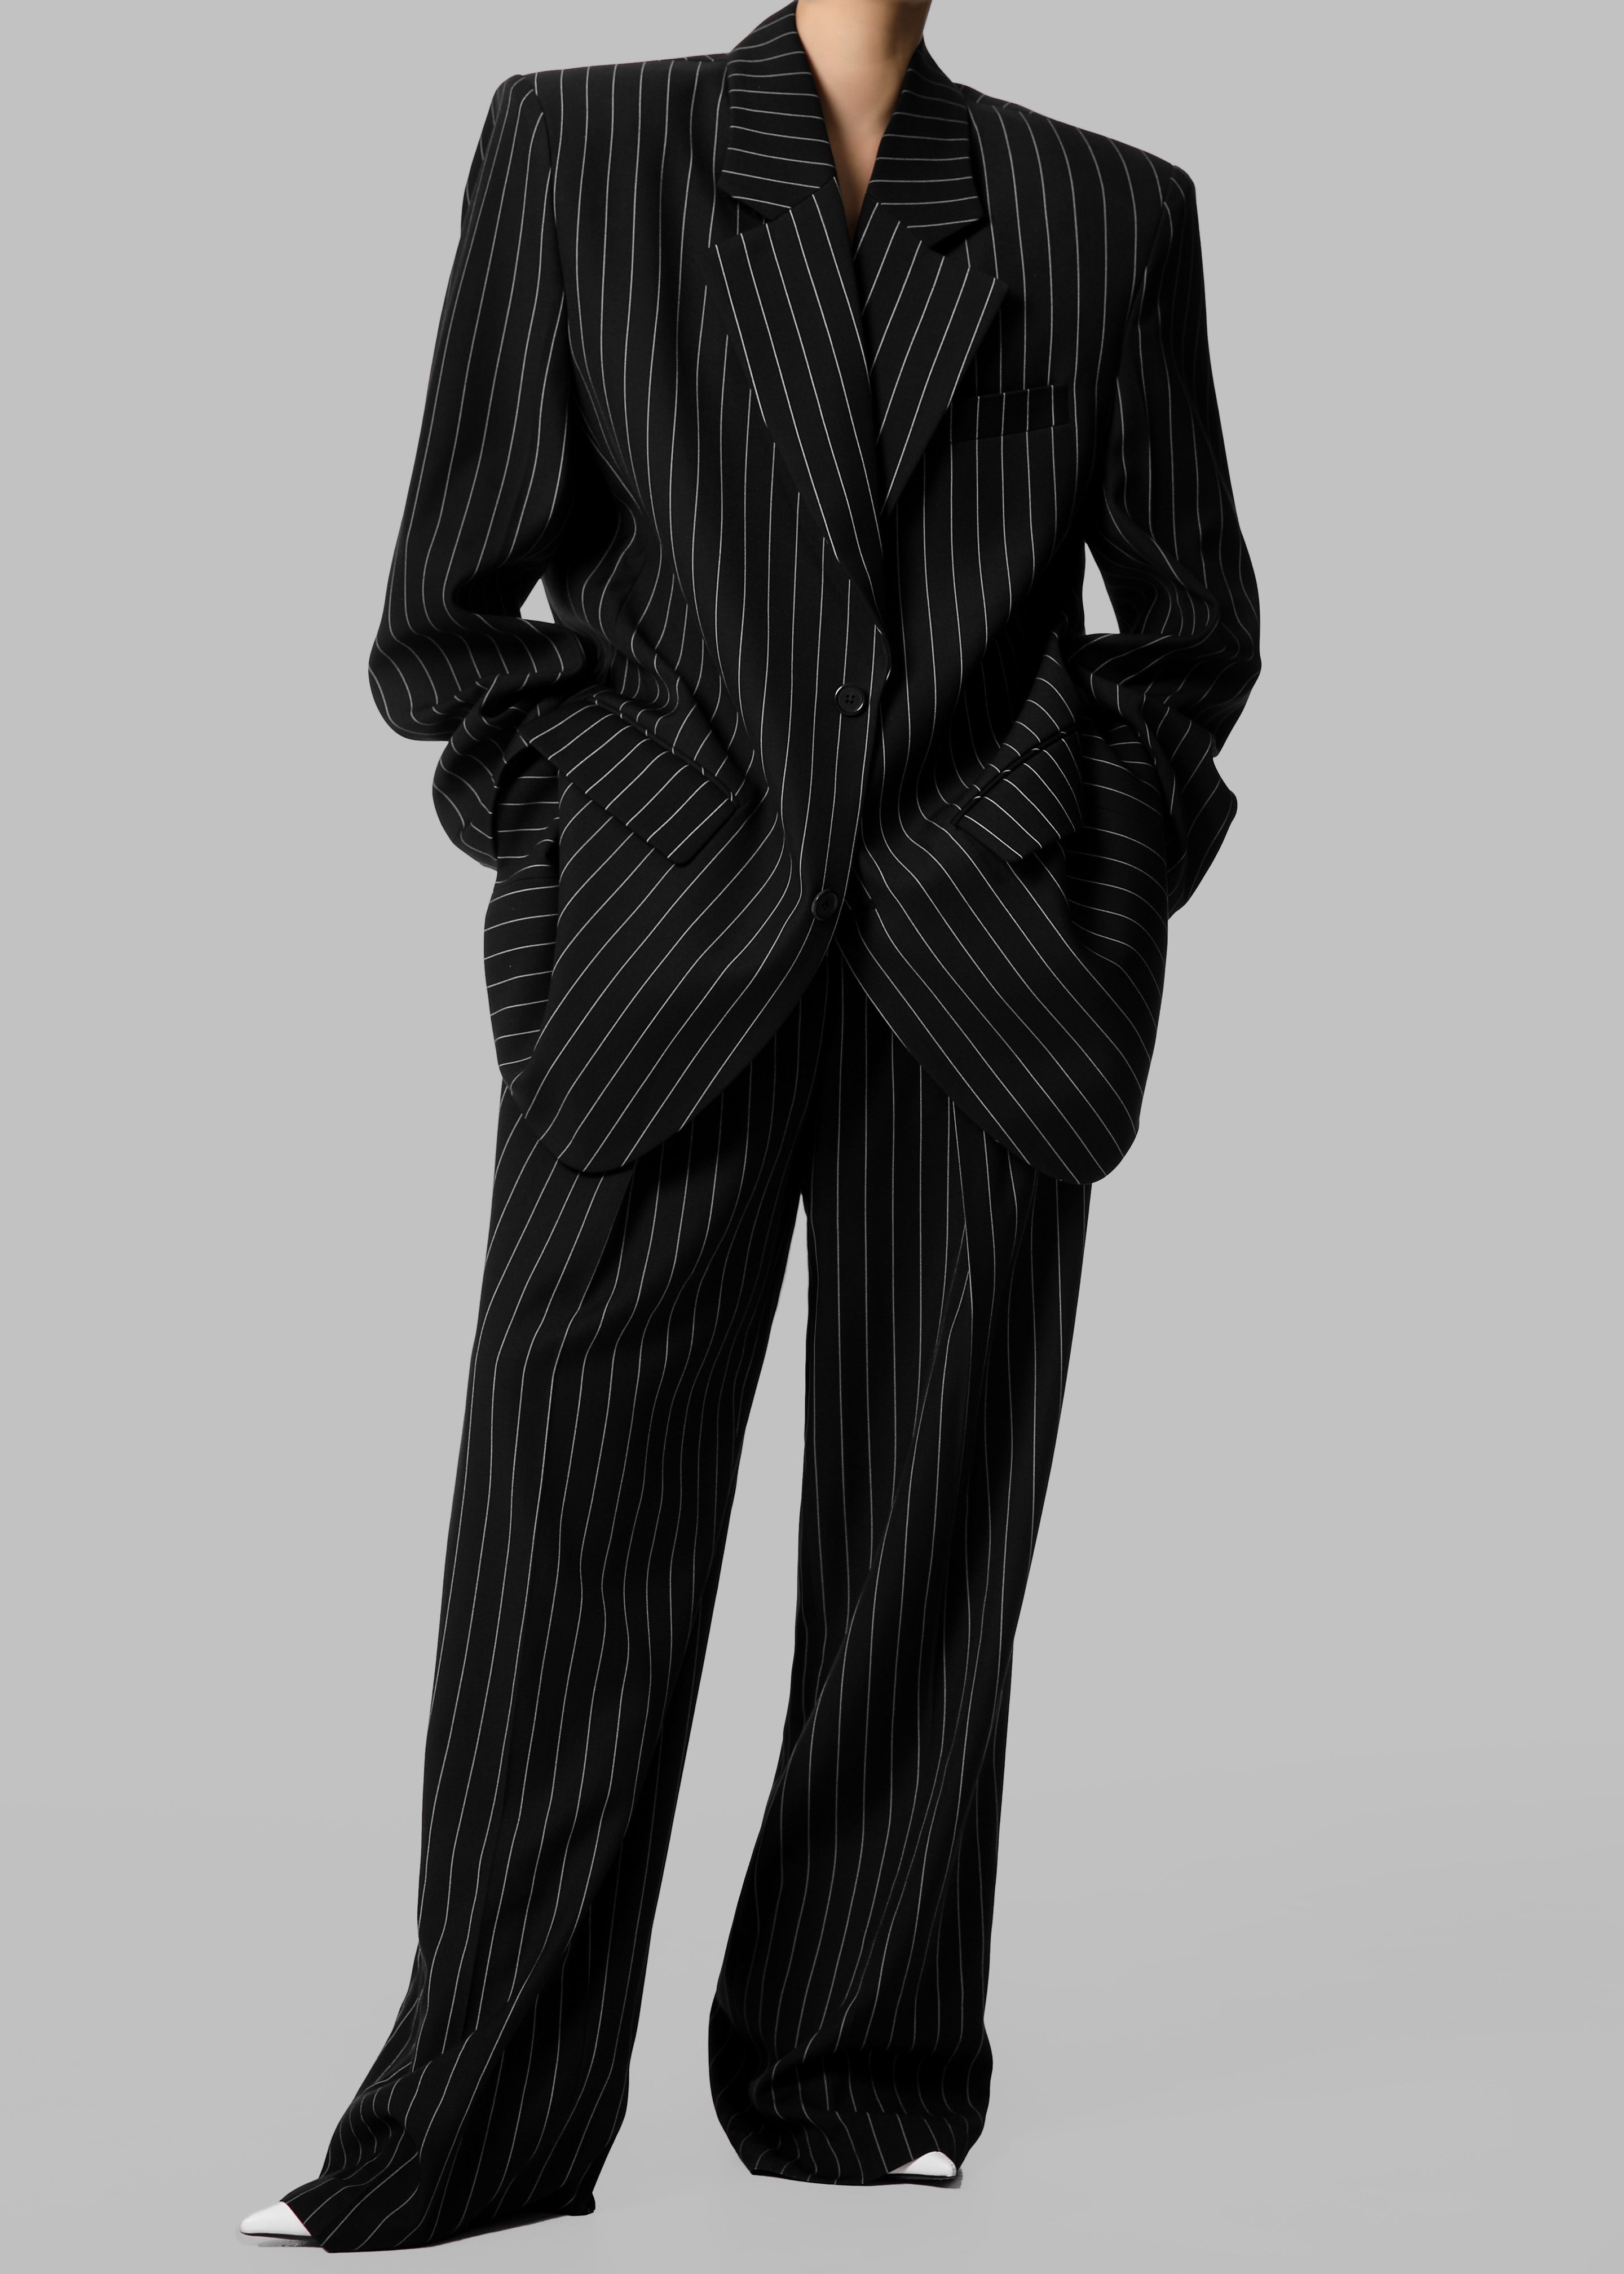 Holland Pleated Trousers - Black/White Pinstripe - 6